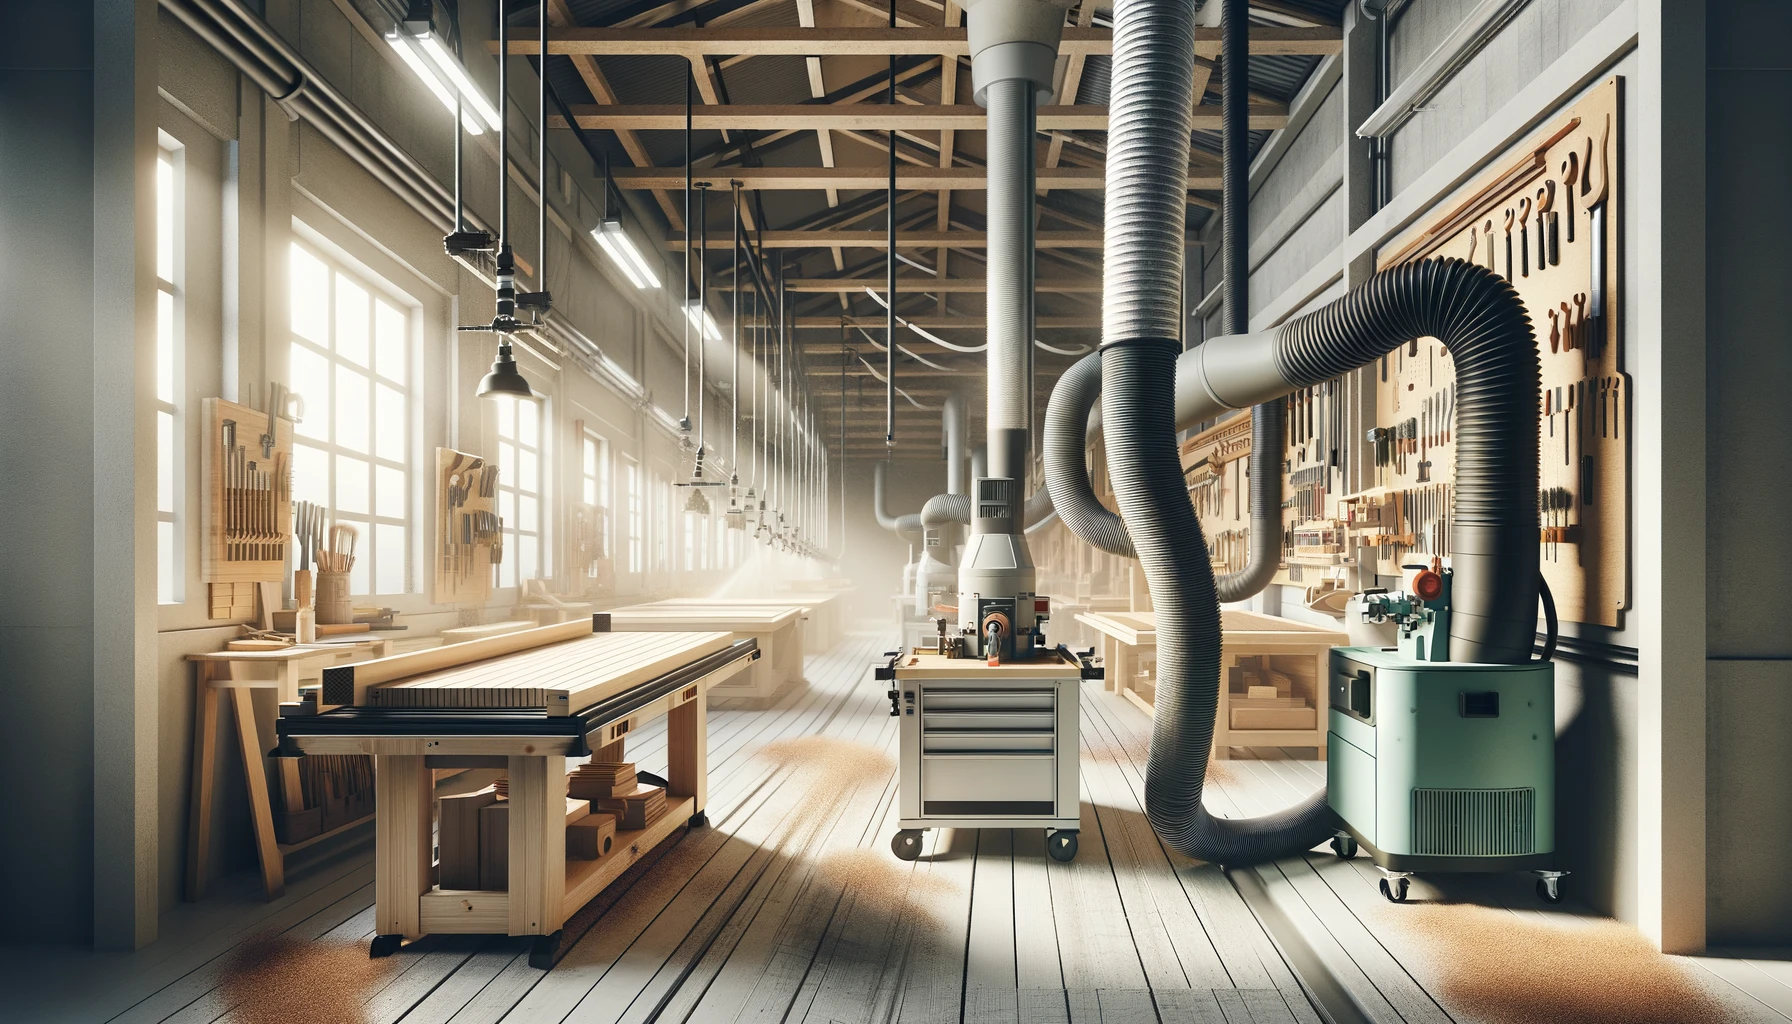 Efficient woodshop with minimal dust, showcasing safety and cleanliness